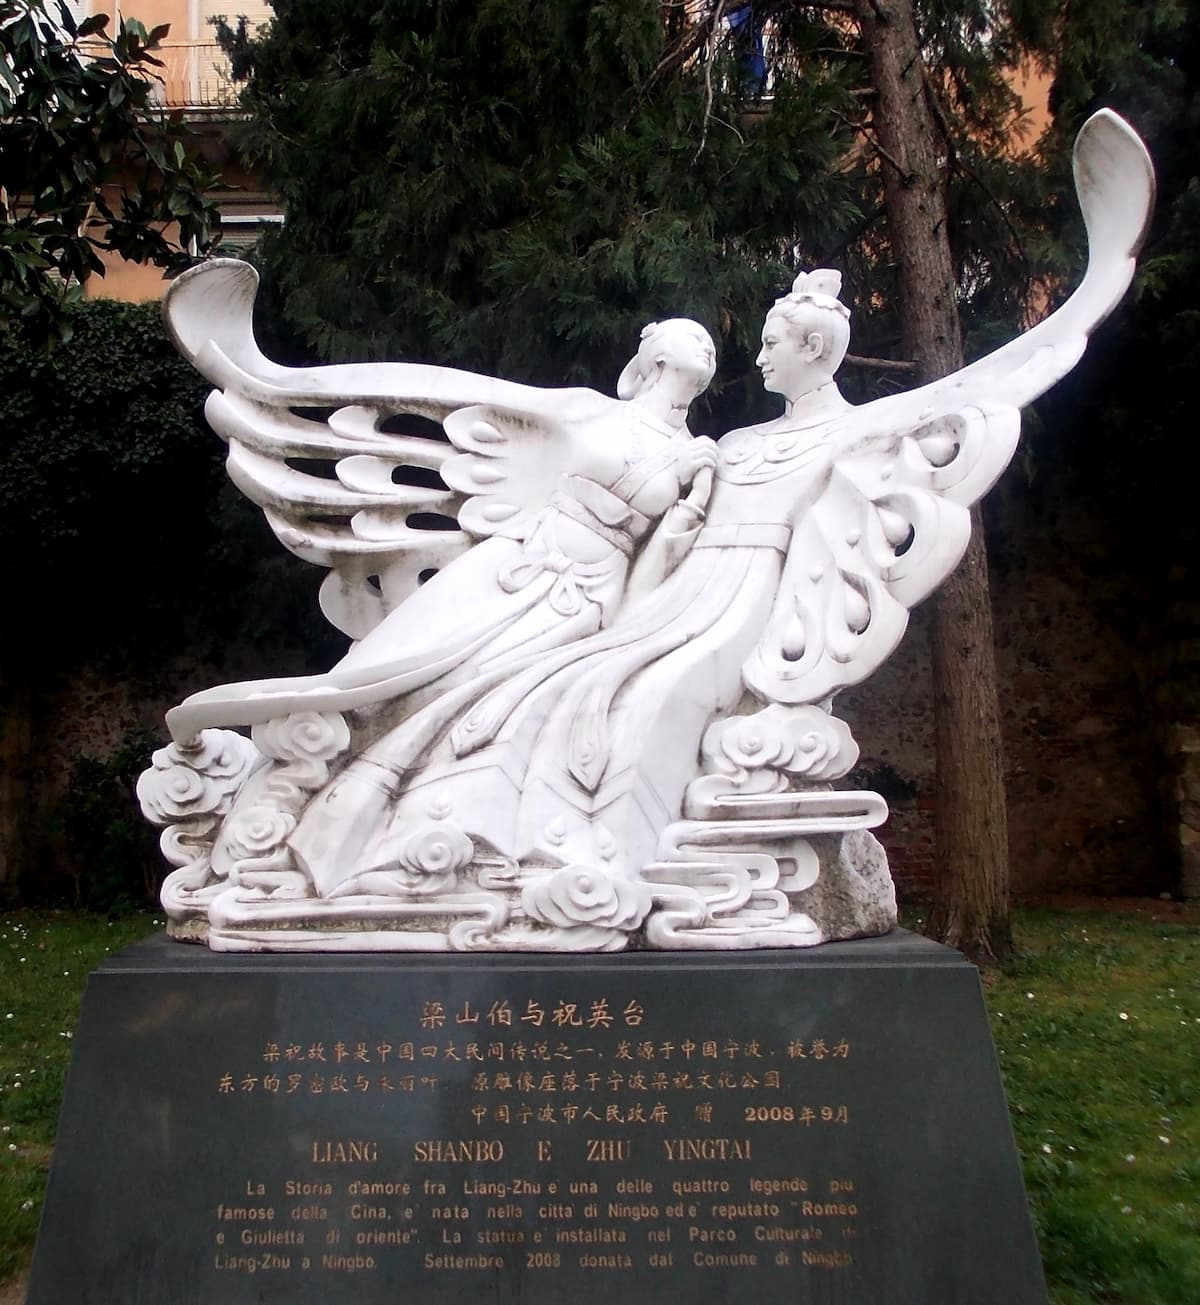 Monument to Liang Shanbo and Zhu Yingtai near the Tomb of Juliette in Verona, Italy (Photo by Andrijko Z.)